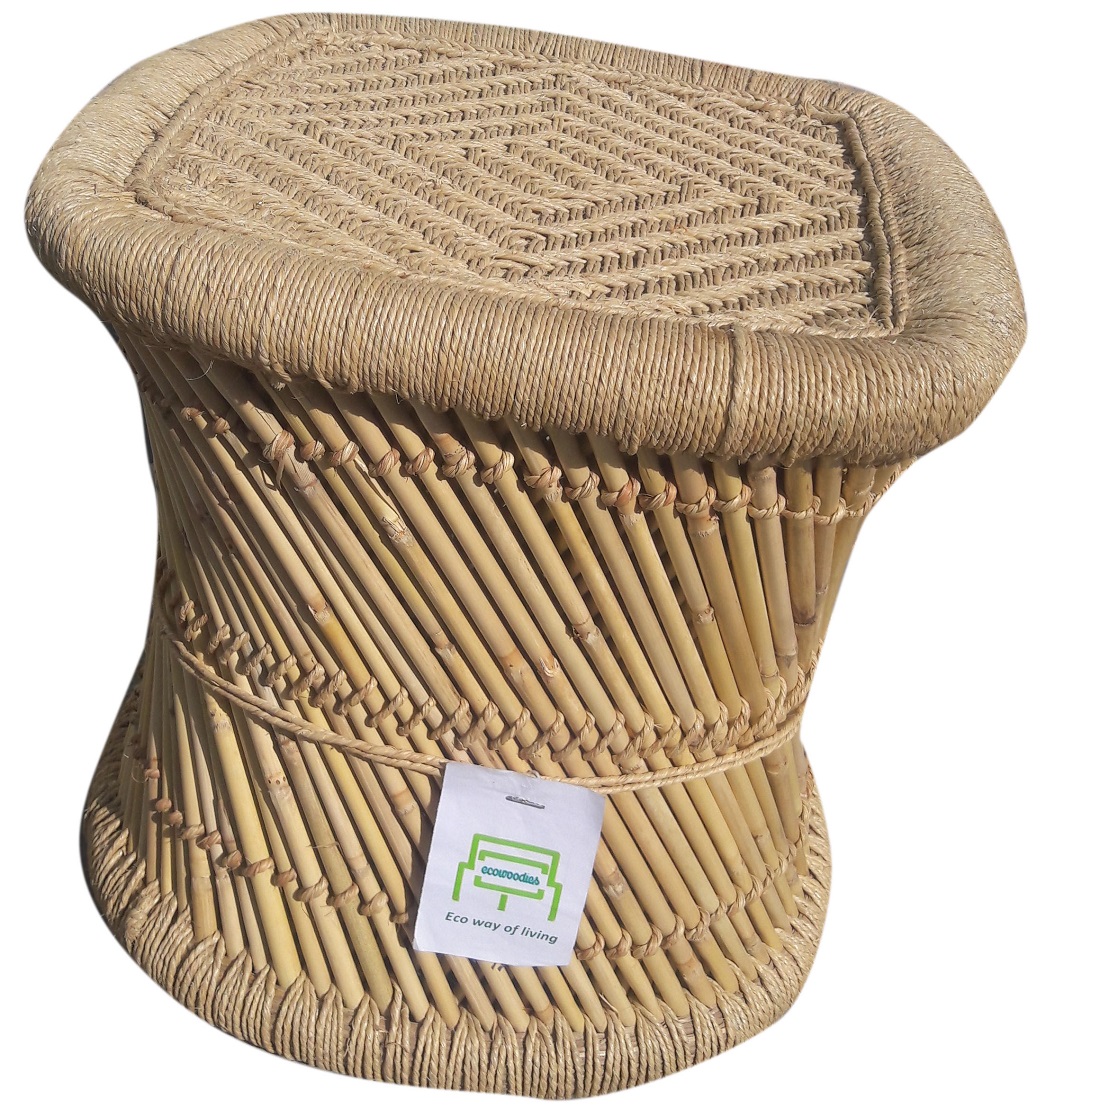 Cheap Hot Selling Bamboo Outdoor Rattan Ottoman for Balcony, Restaurant, Hotel and Garden